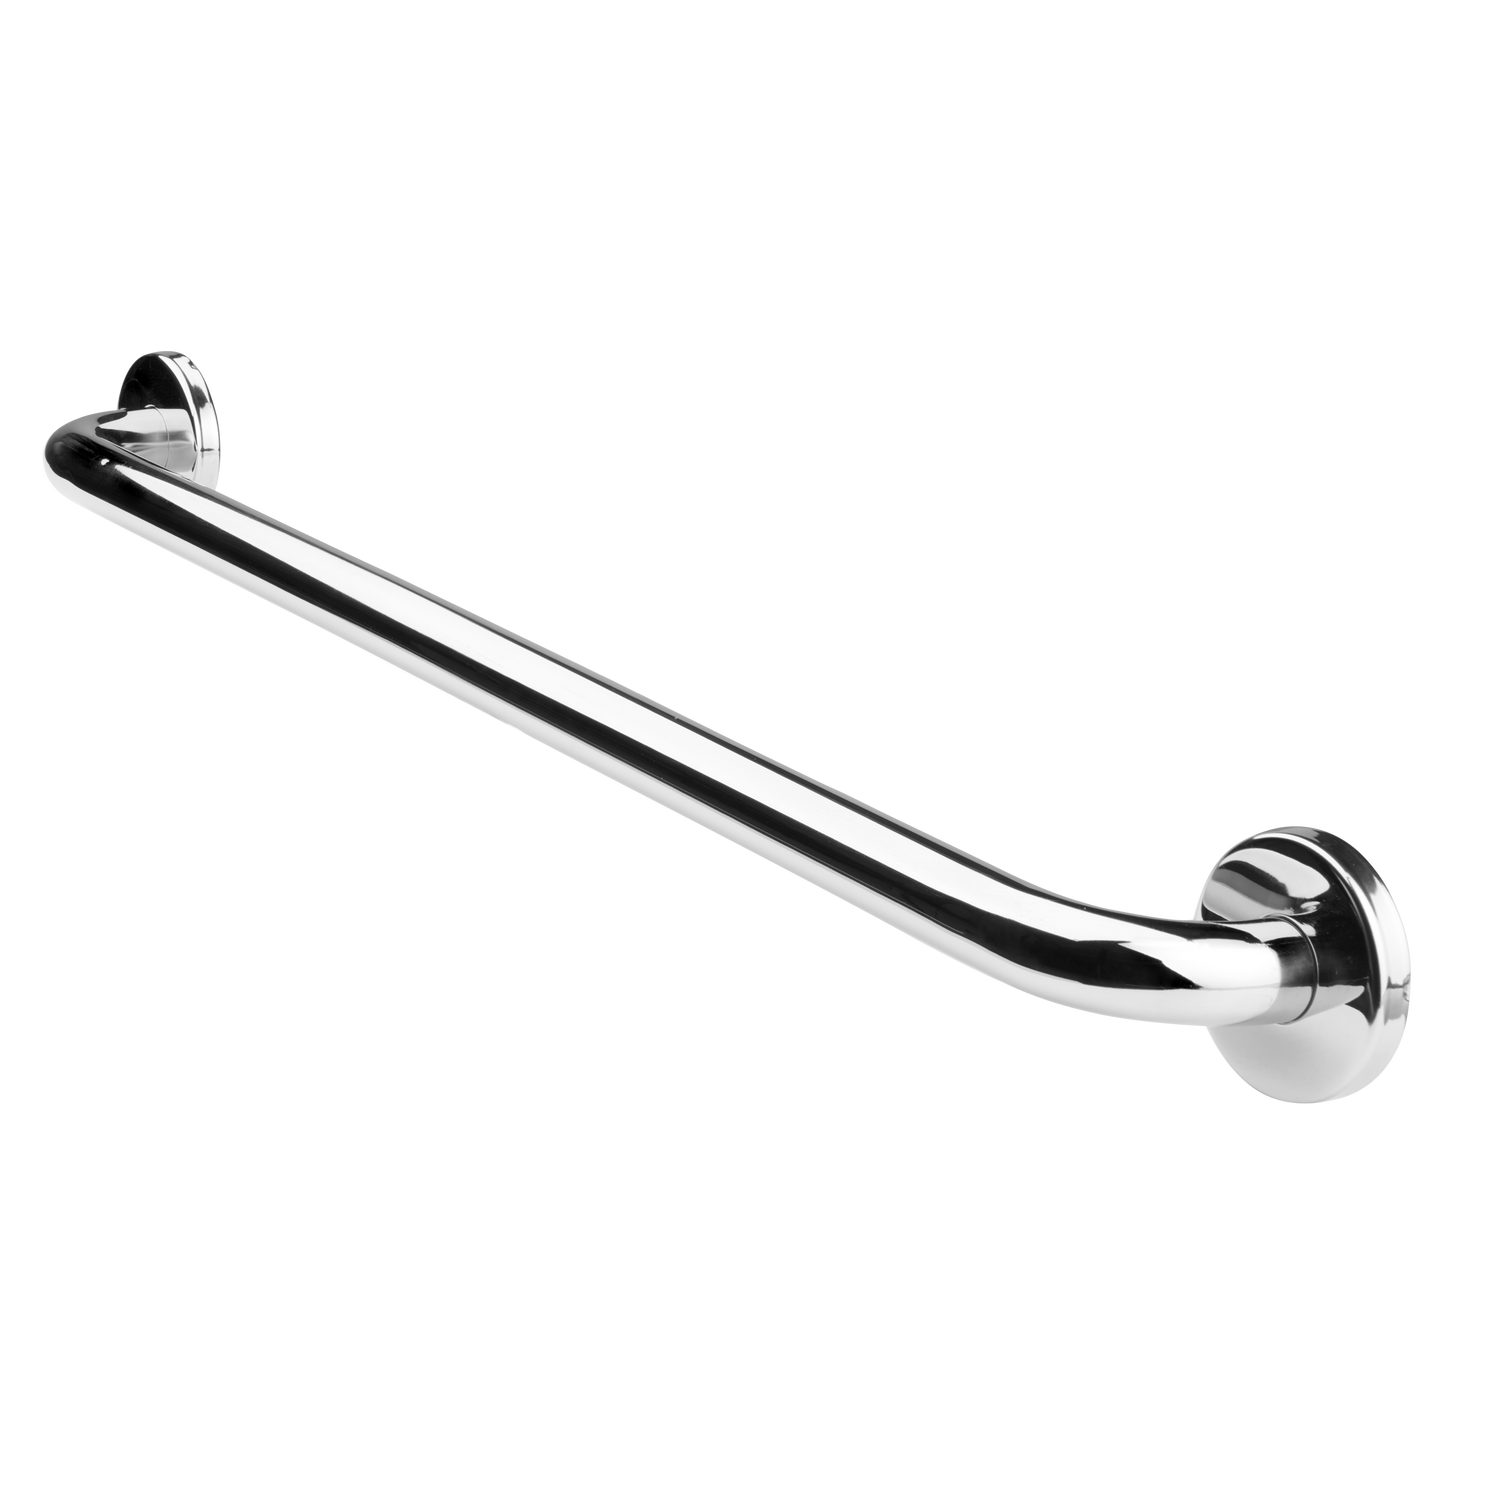 SecuCare Grab Bar ø25 mm polished stainless steel